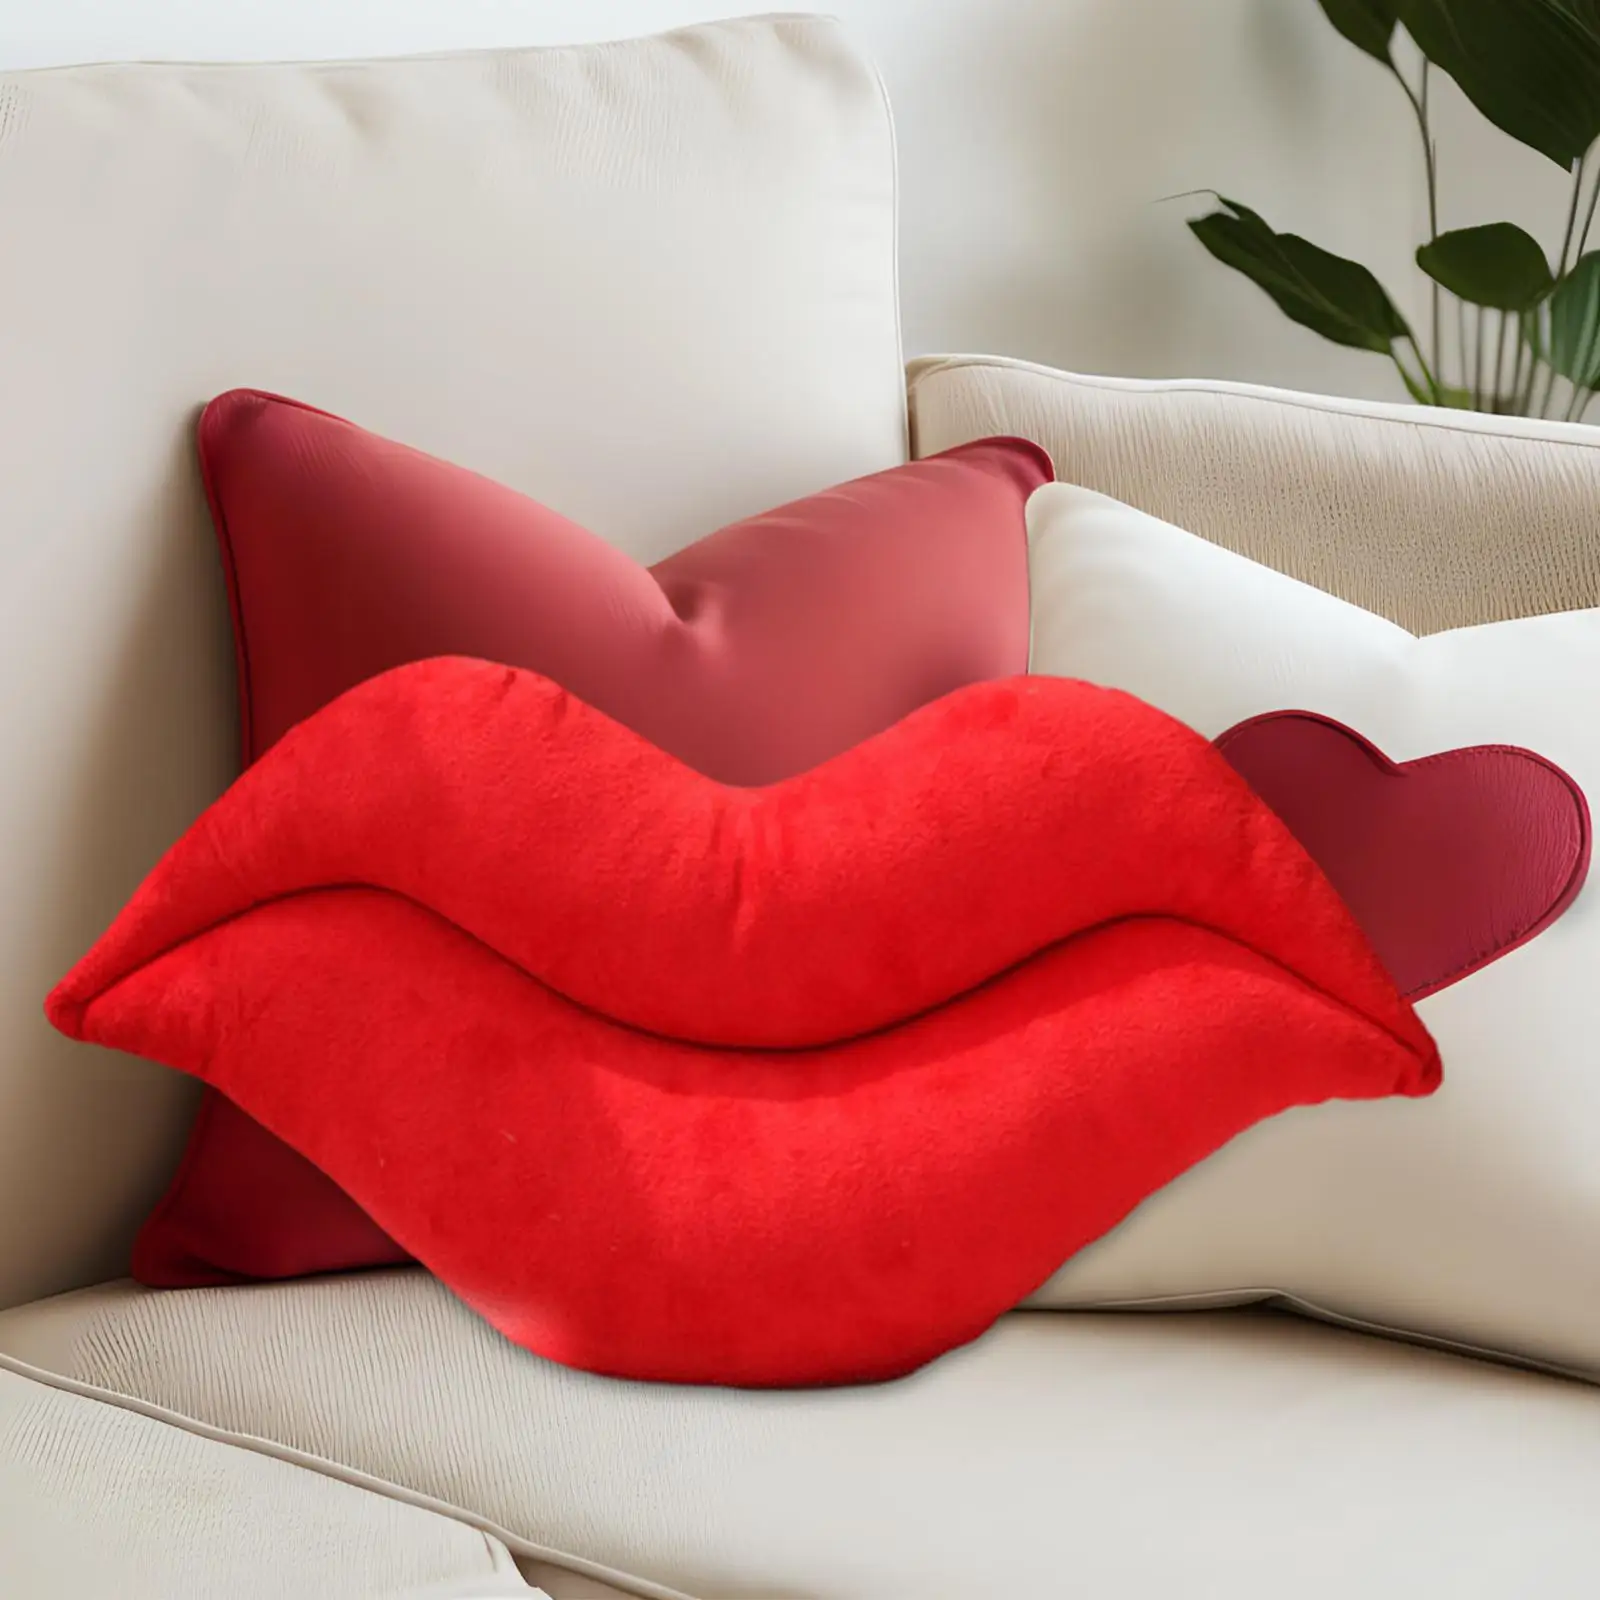 Lip Shaped Throw Pillow Cute Lightweight Valentines Day Decor Decorative Pillow for Car Seats Hotel Couch Bench Family Members